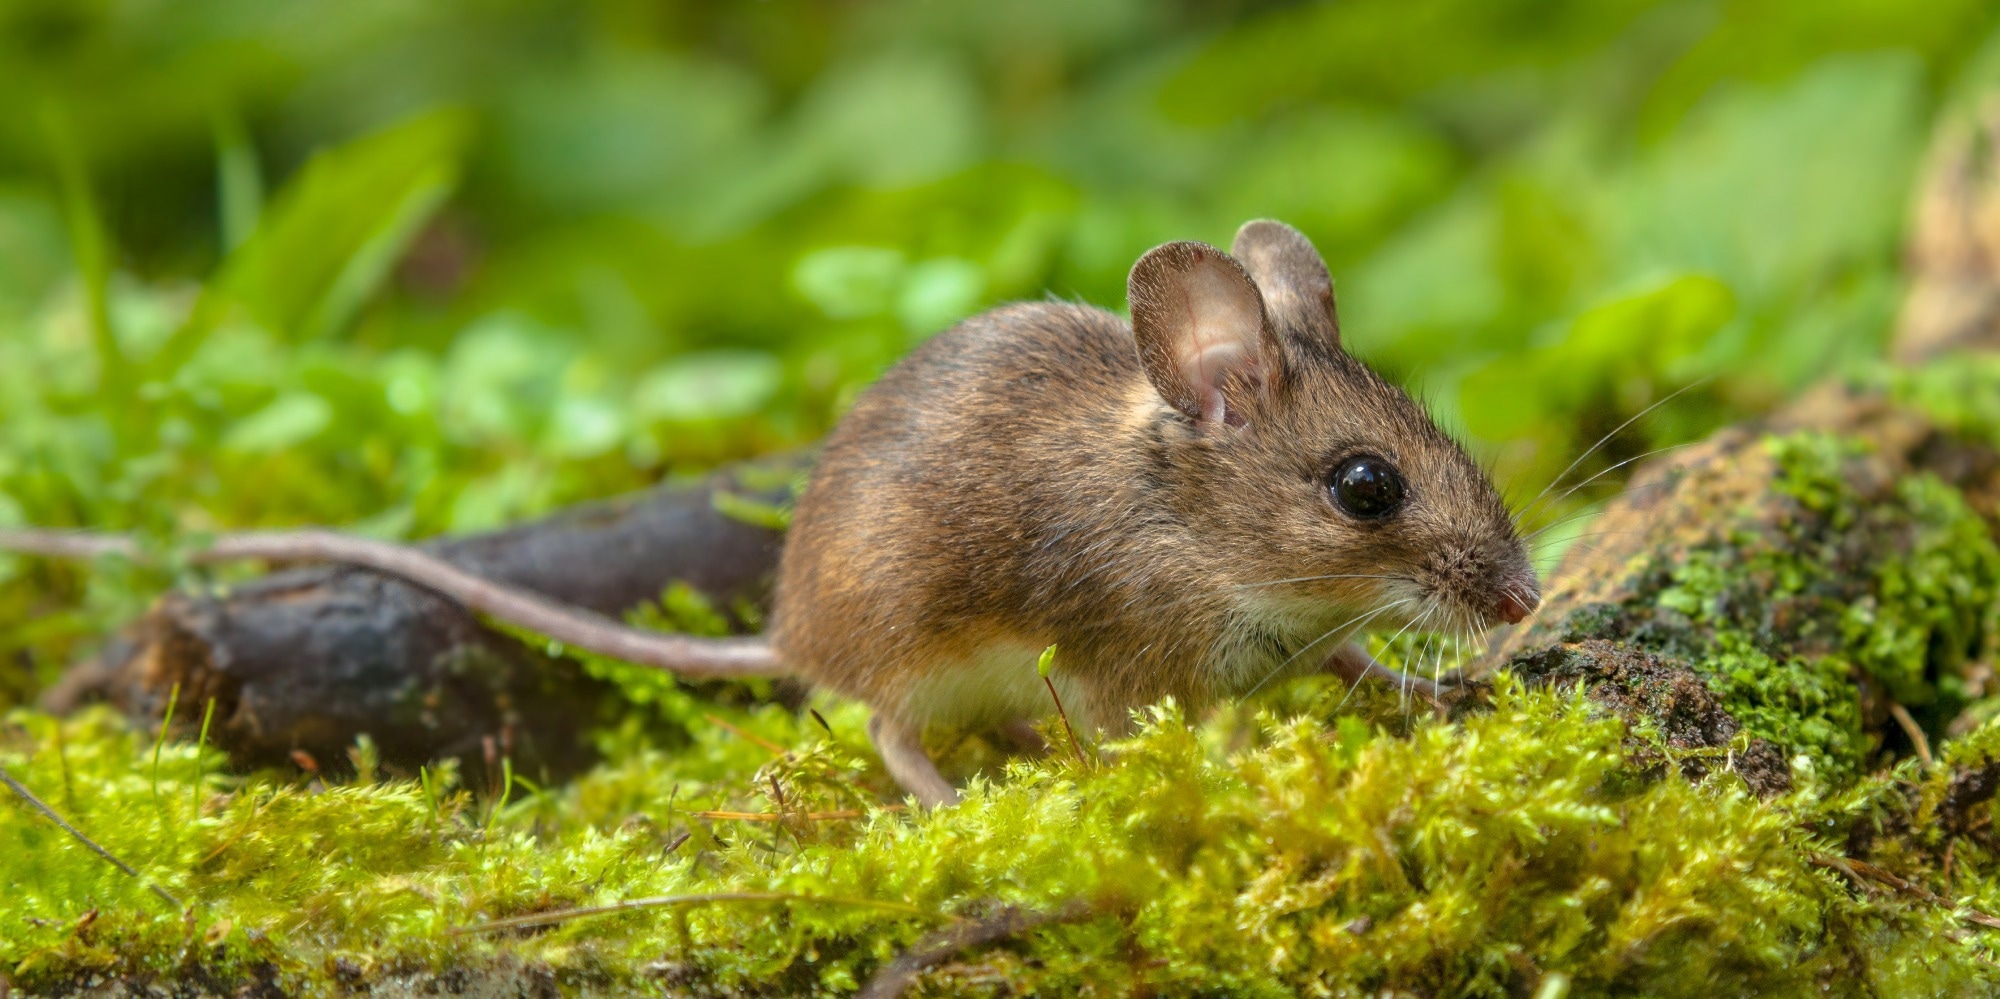 Research Letter: Serologic Surveillance for SARS-CoV-2 Infection among Wild Rodents, Europe. Image Credit: Rudmer Zwerver / Shutterstock